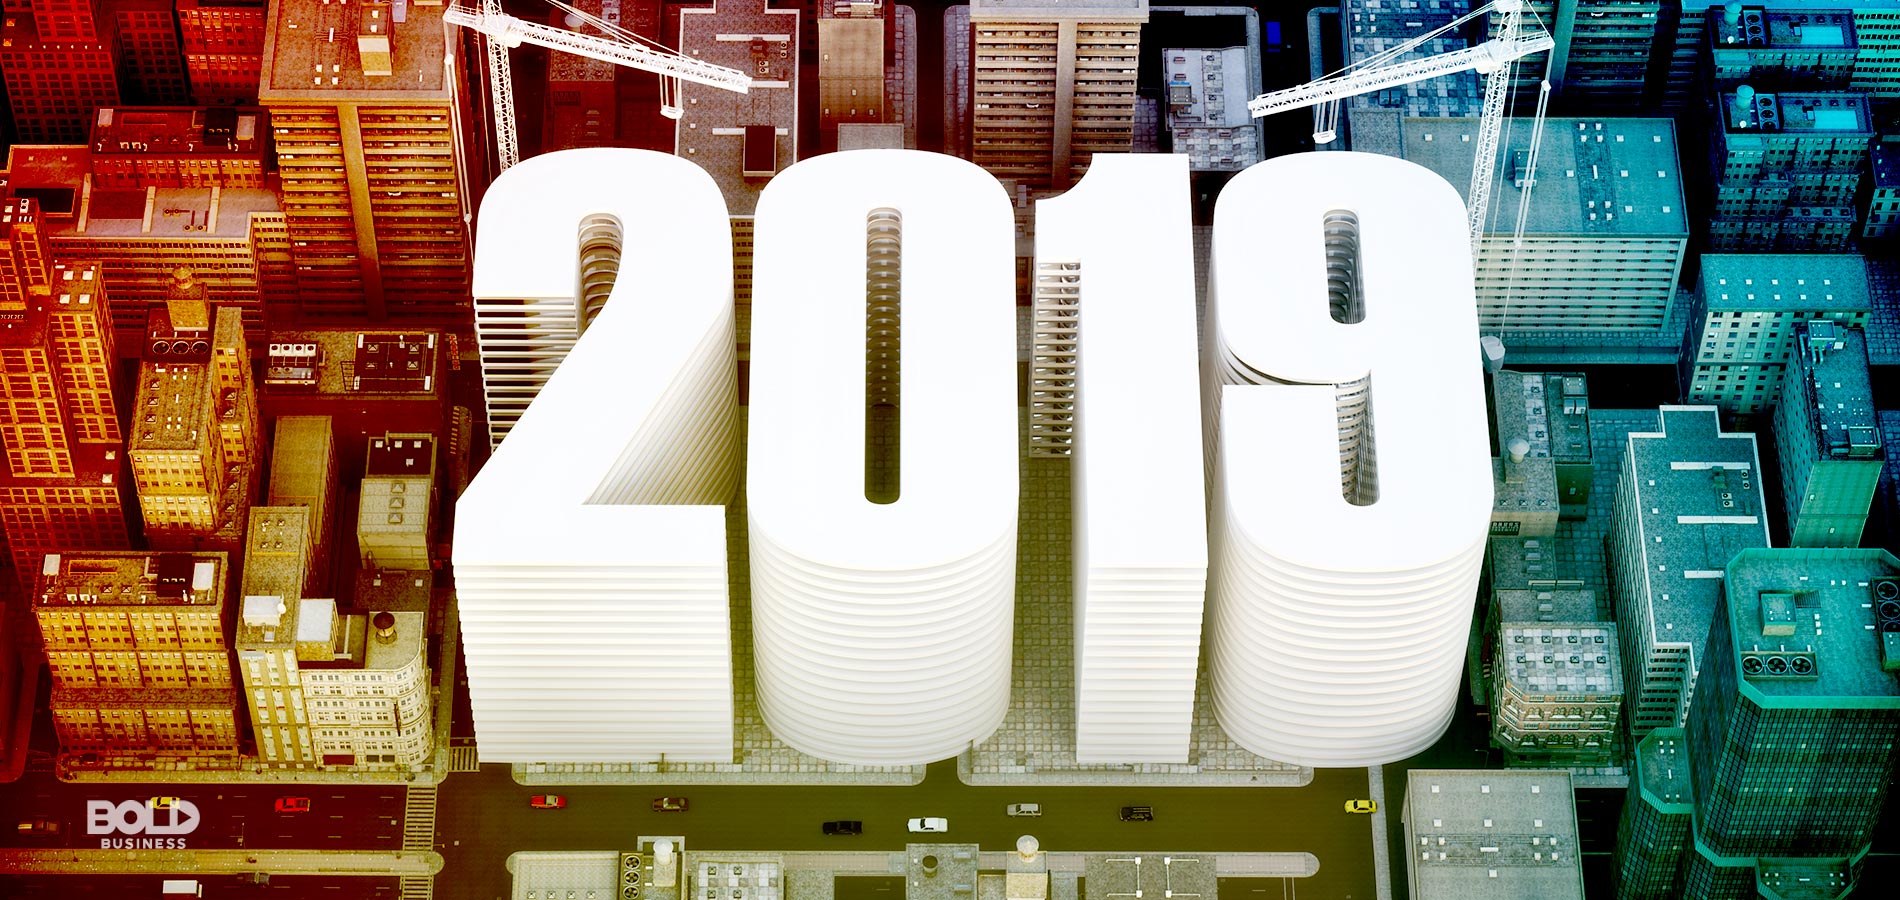 2019 Business Trends: A Look at the Predictions and How They’re Shaping Up